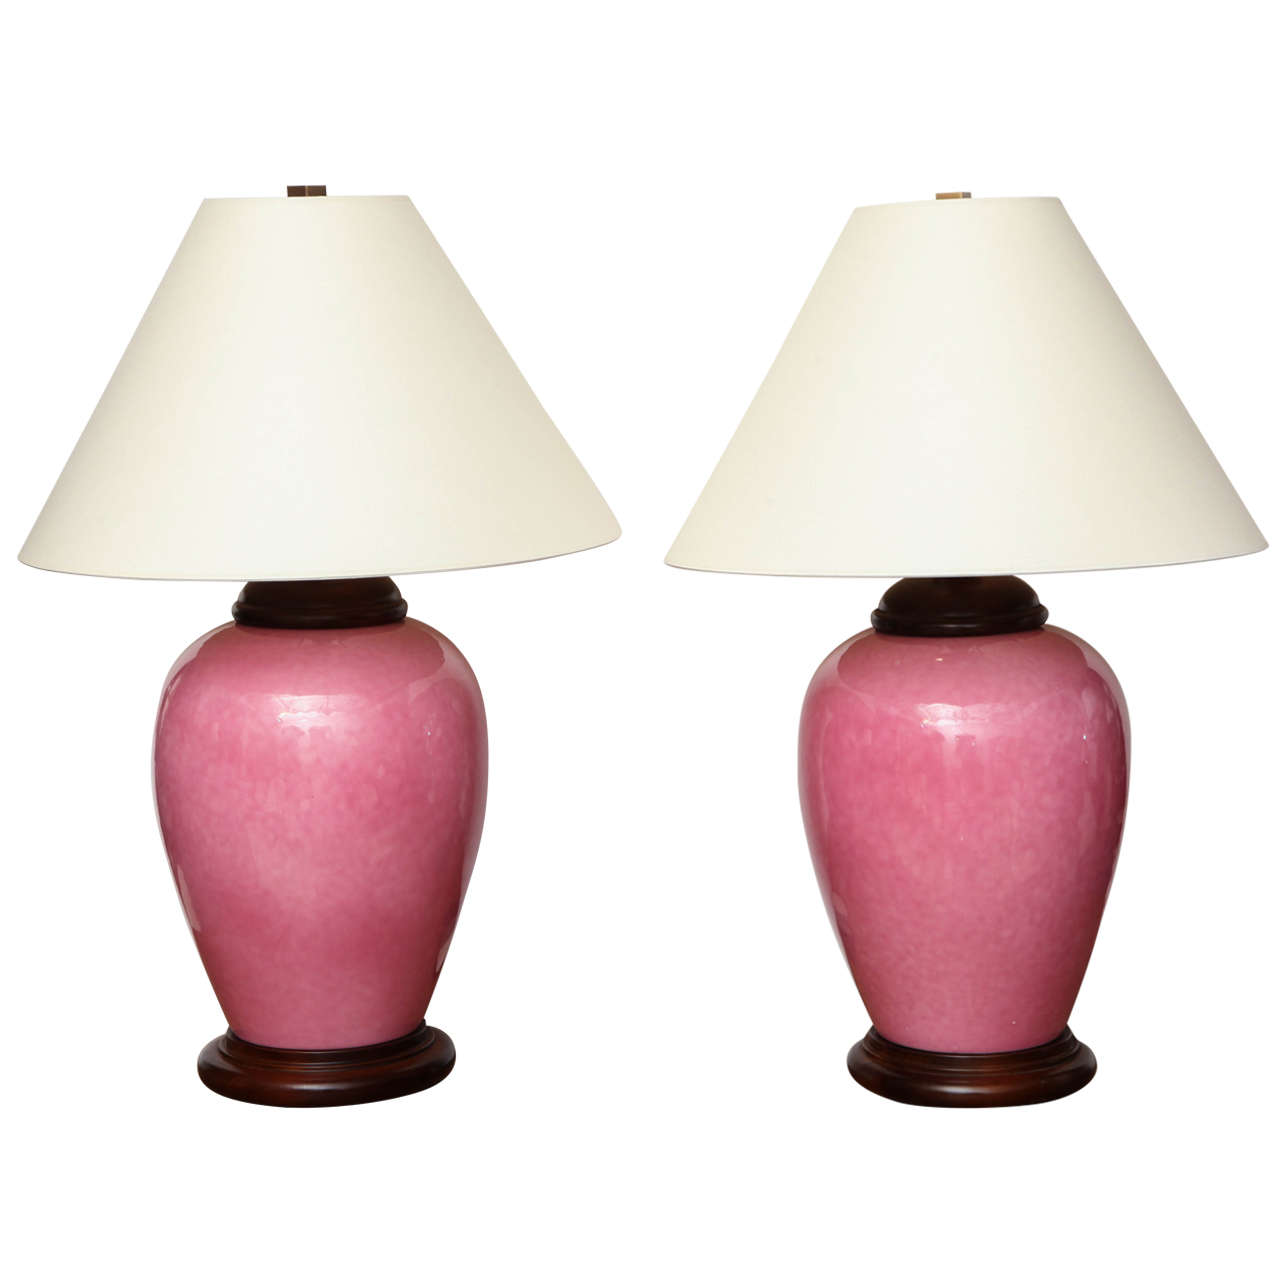 Pair of Urn Shaped Ceramic Rose Colored Table Lamps, Italy, circa 1970s For Sale